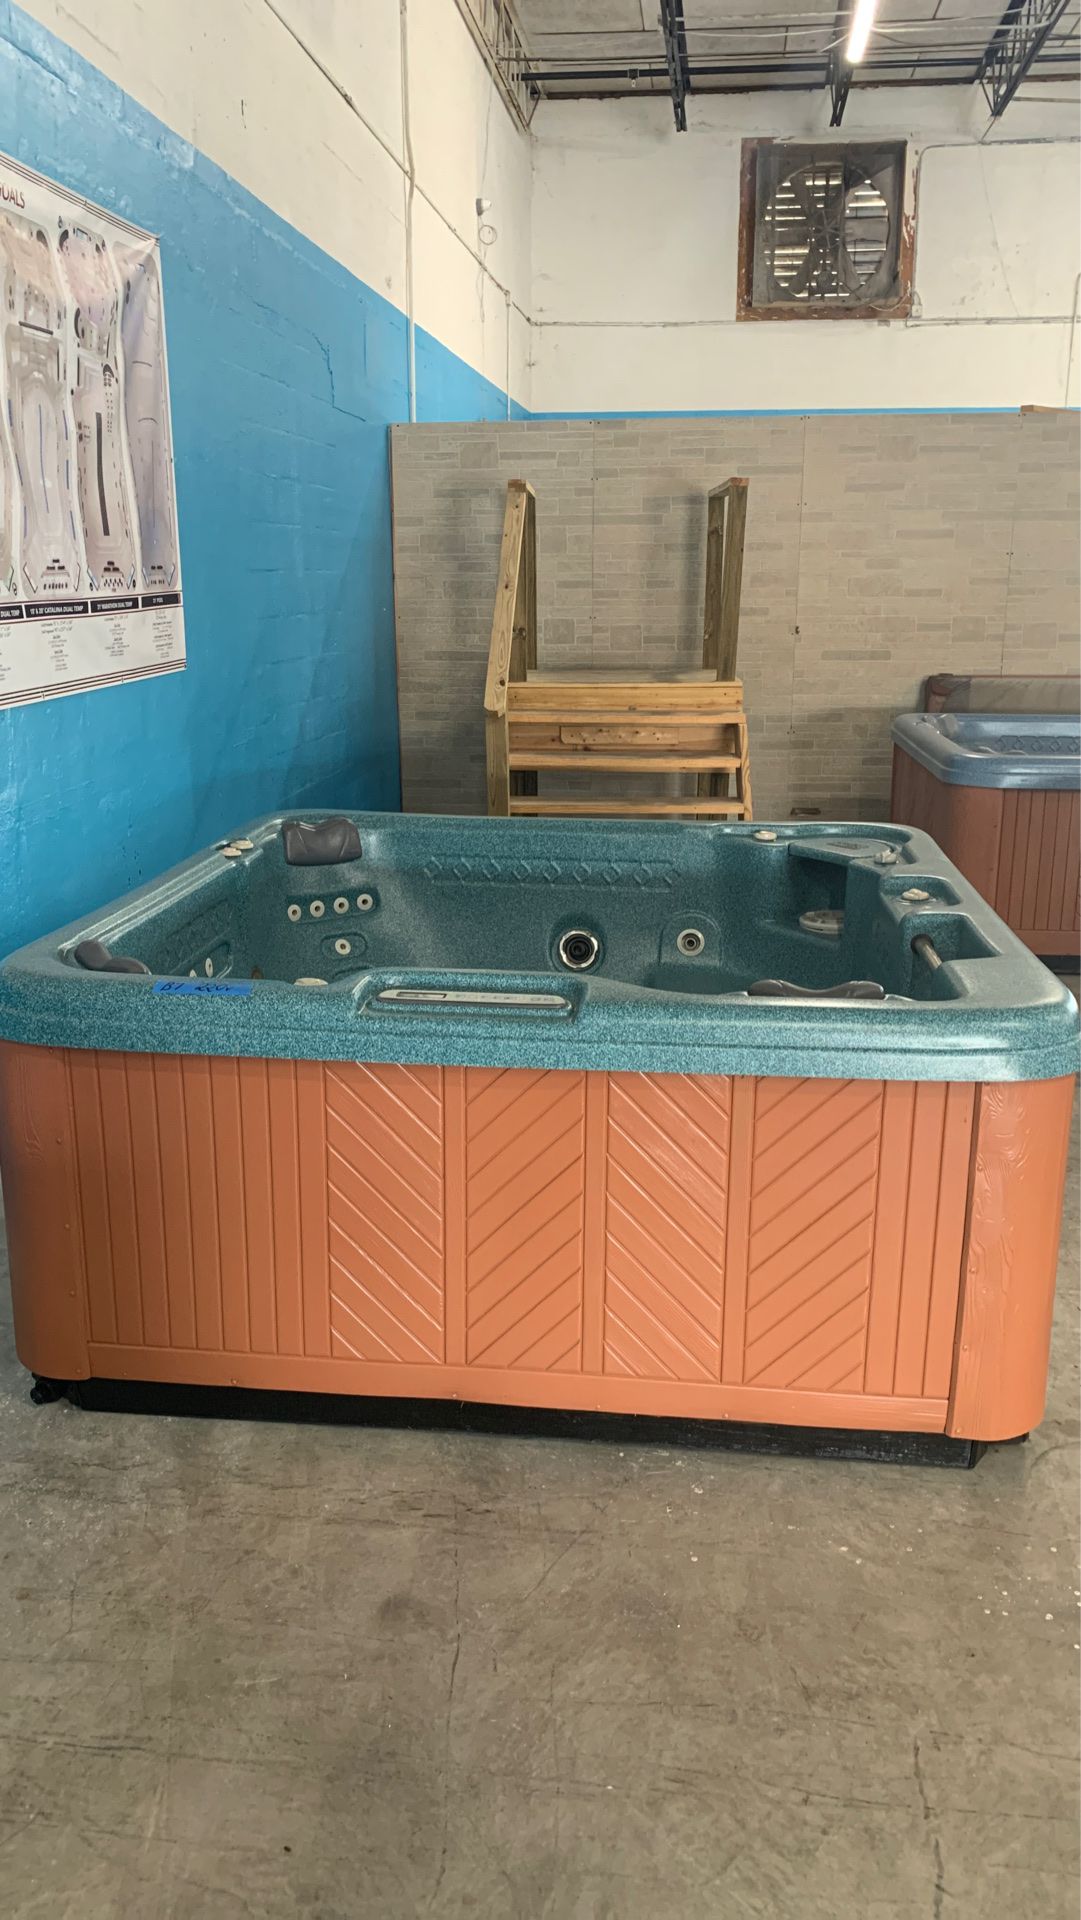 Preowned Leisure Bay hot tub ready for delivery!